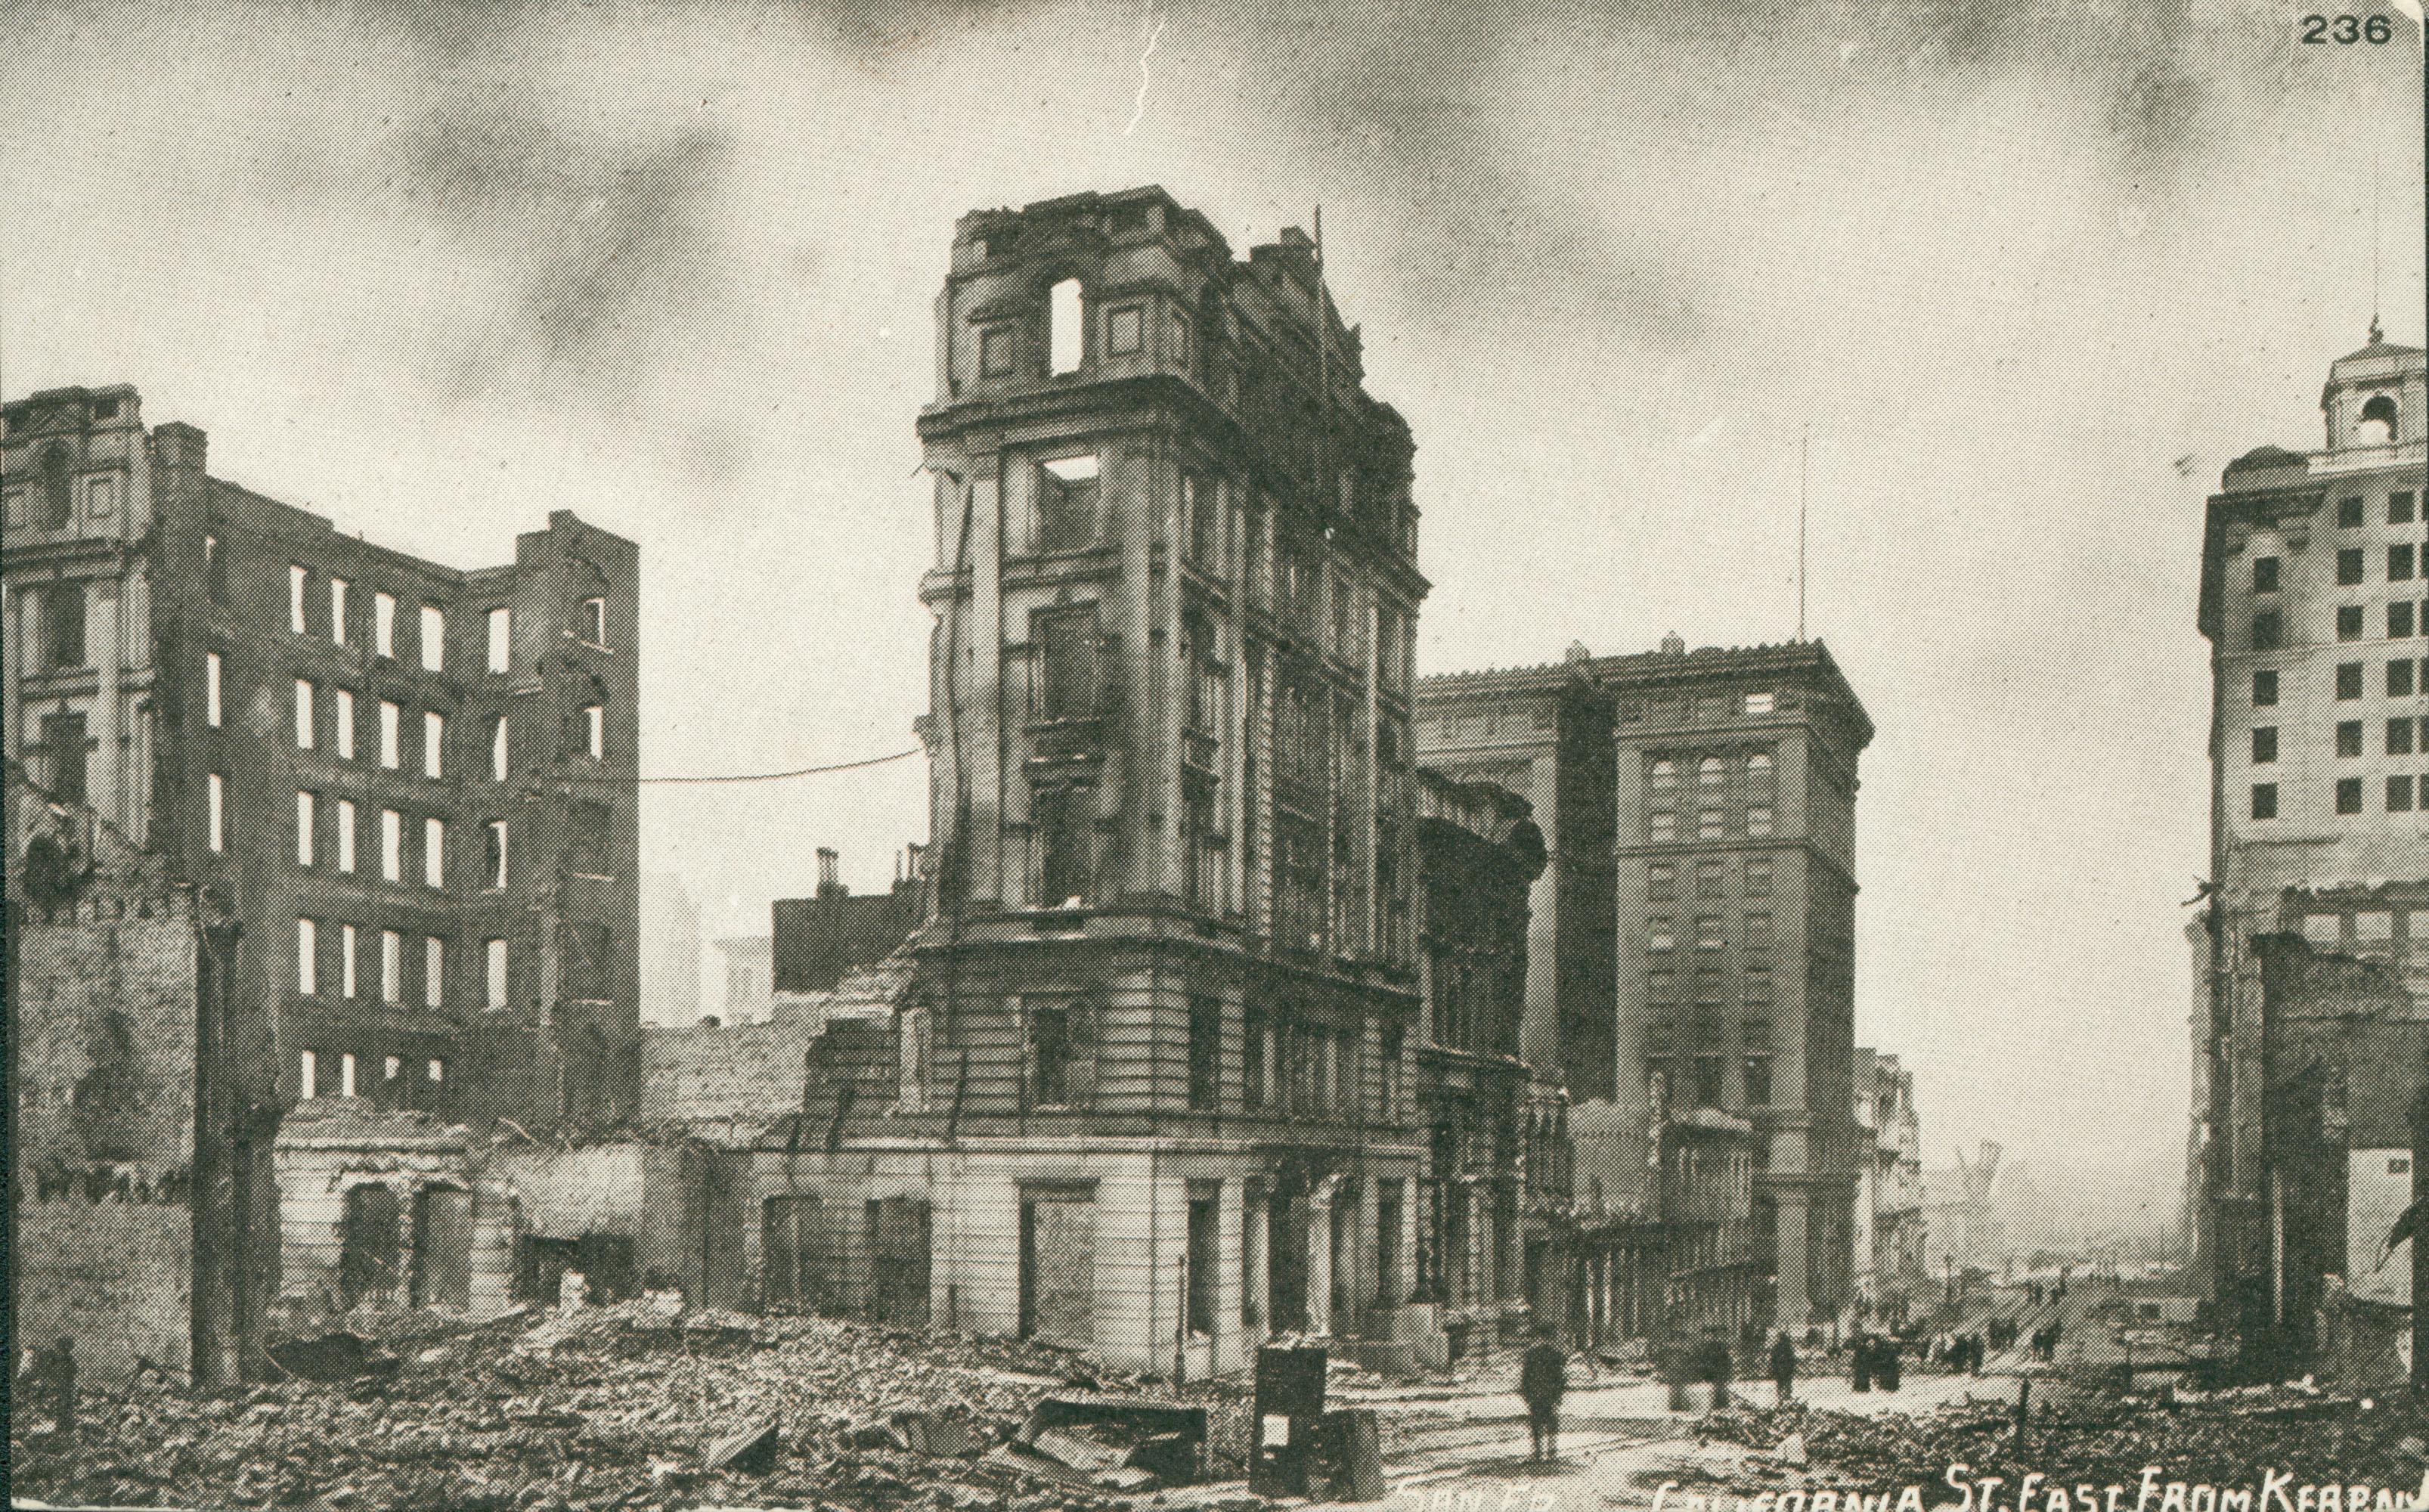 Photo showing the destruction of buildings along California Street.